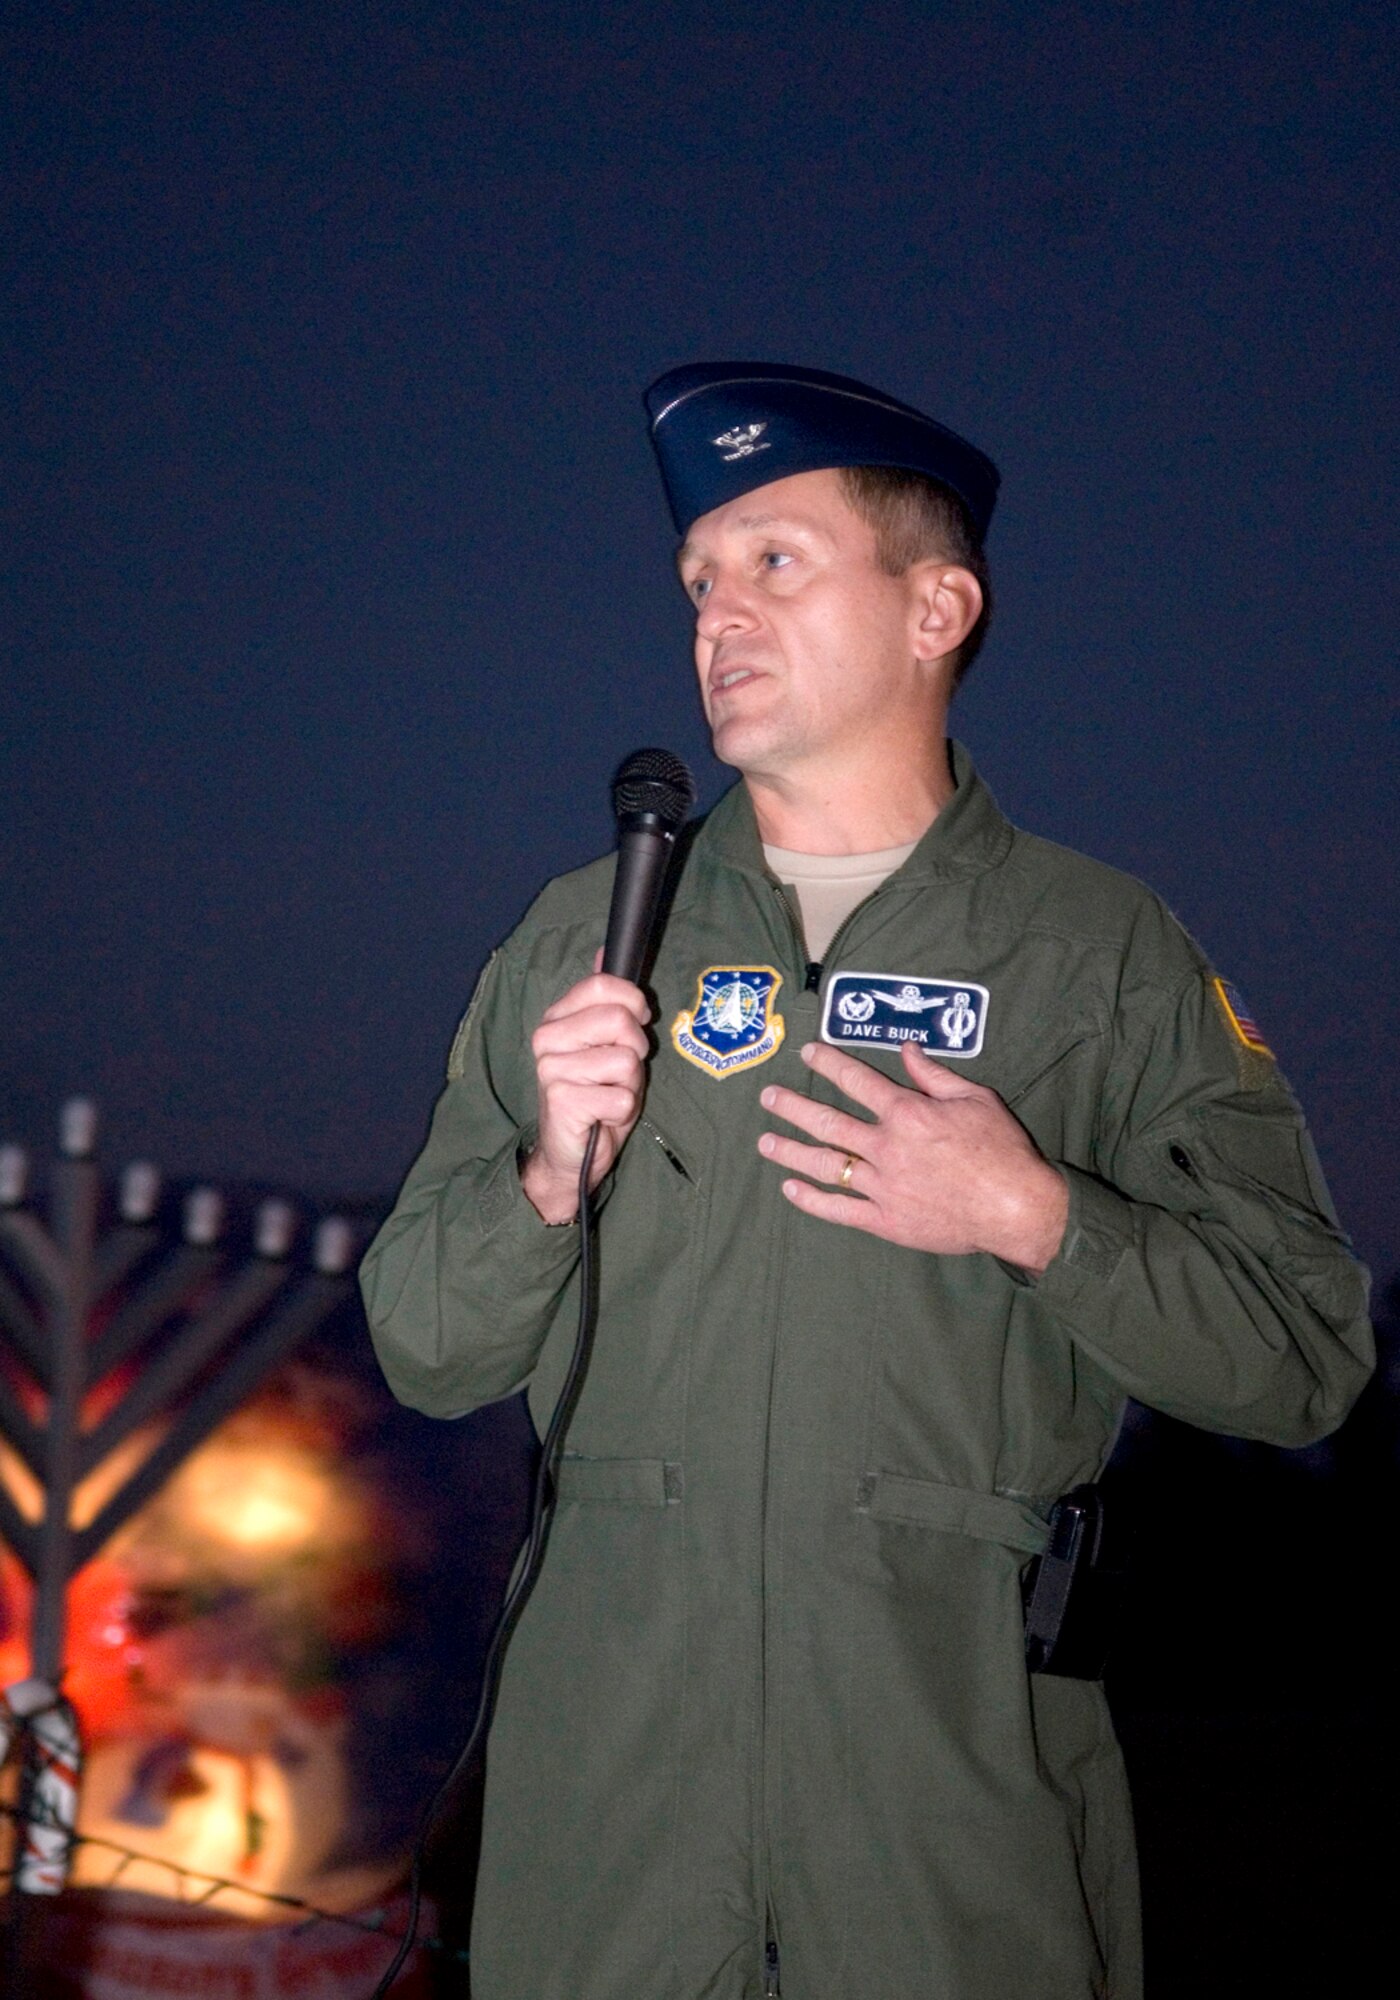 VANDENBERG AIR FORCE BASE, Calif. – Col. David Buck, the 30th Space Wing commander, speaks during the annual Holiday Tree Lighting Ceremony on Thursday, Dec. 3, 2009, outside of Building 11777. Colonel Buck started off the ceremony by stressing the importance of family members during the holiday. (U.S. Air Force photo/Senior Airman Ashley Reed)